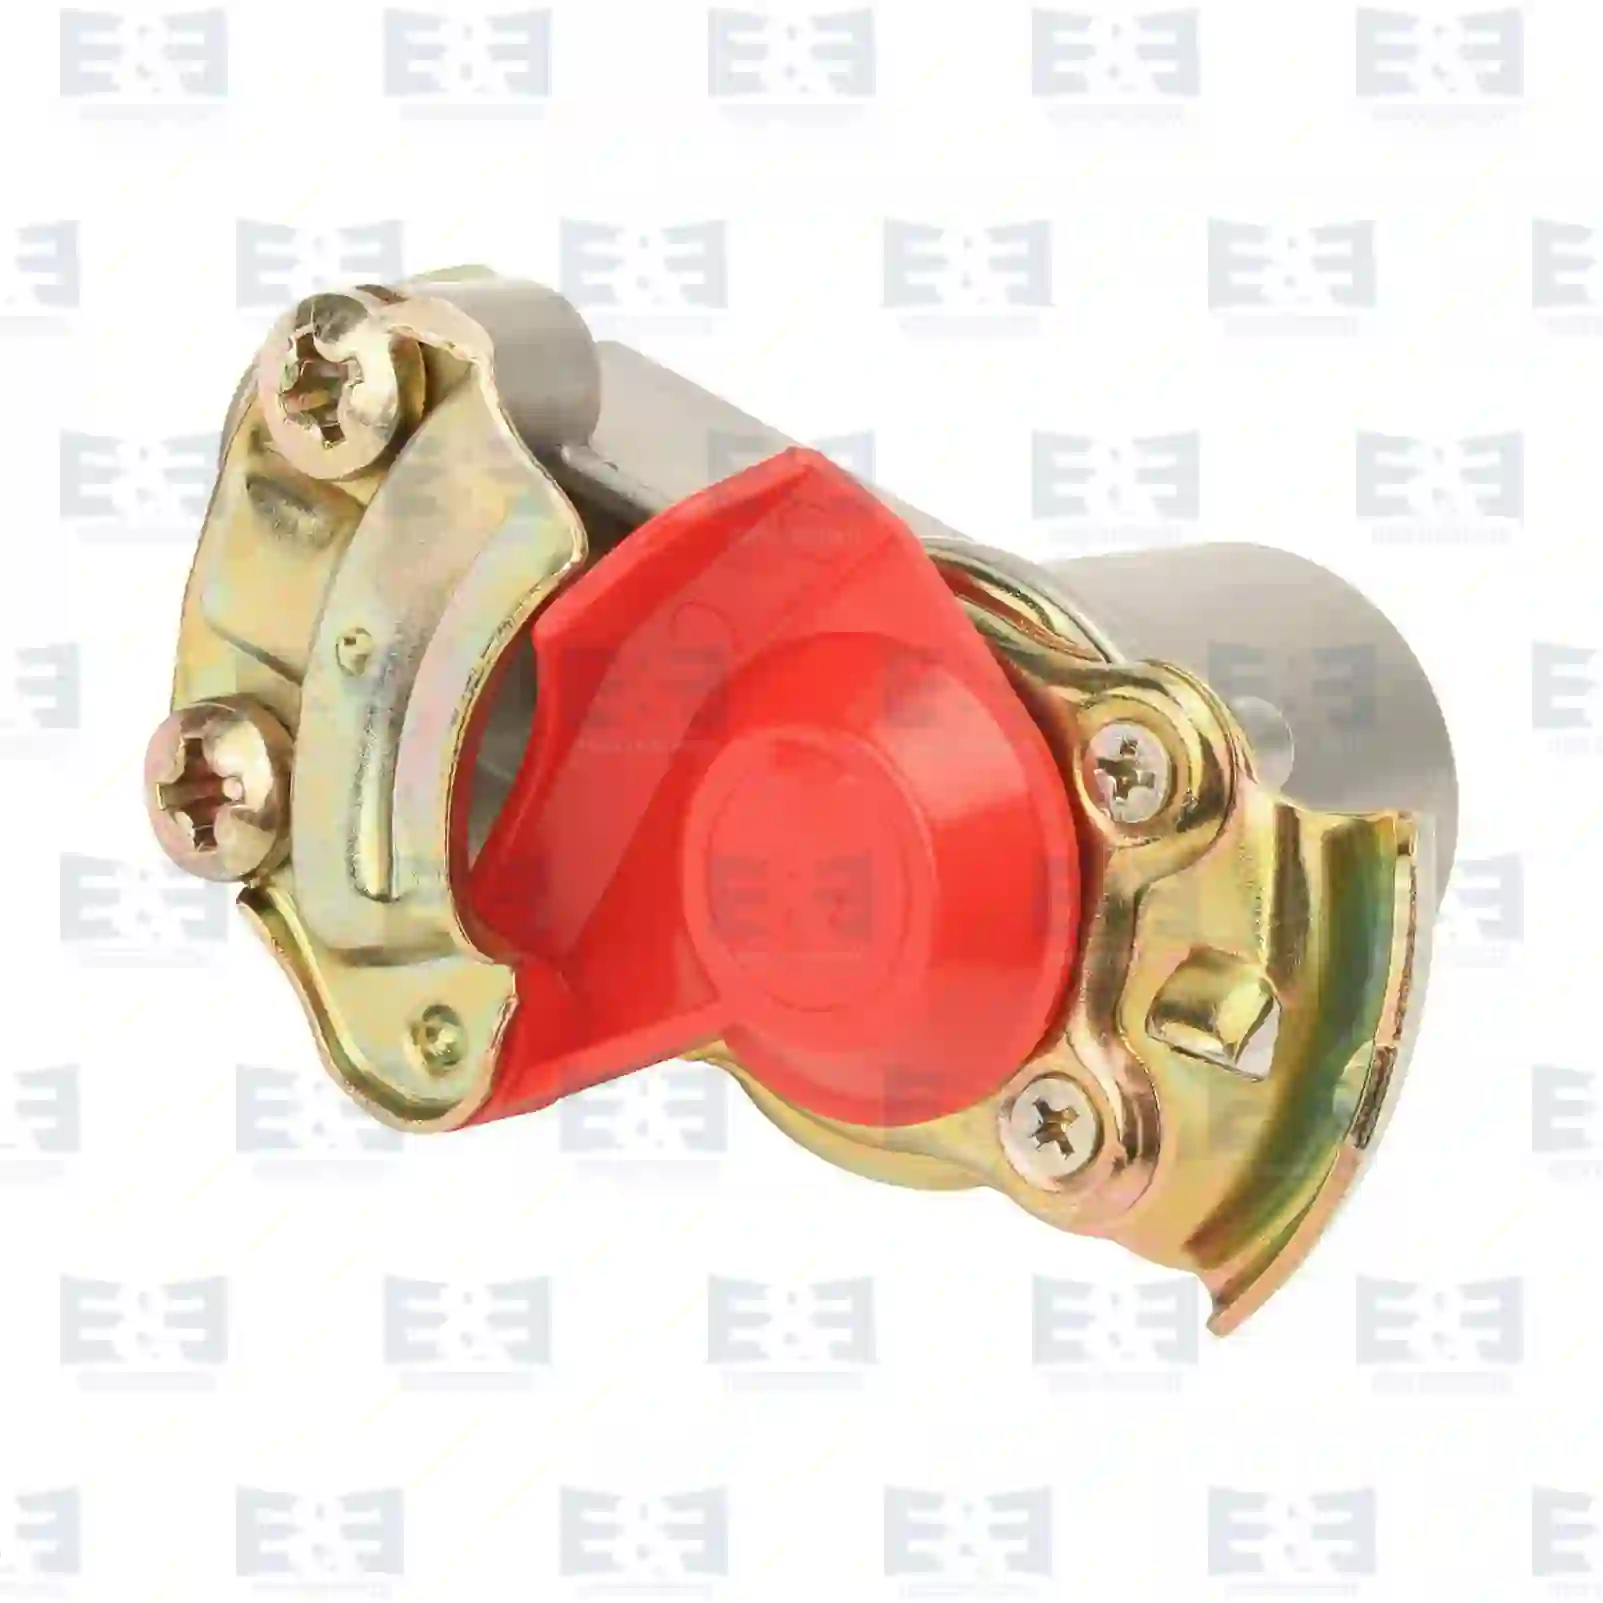  Palm coupling, red lid, with pipe filter || E&E Truck Spare Parts | Truck Spare Parts, Auotomotive Spare Parts